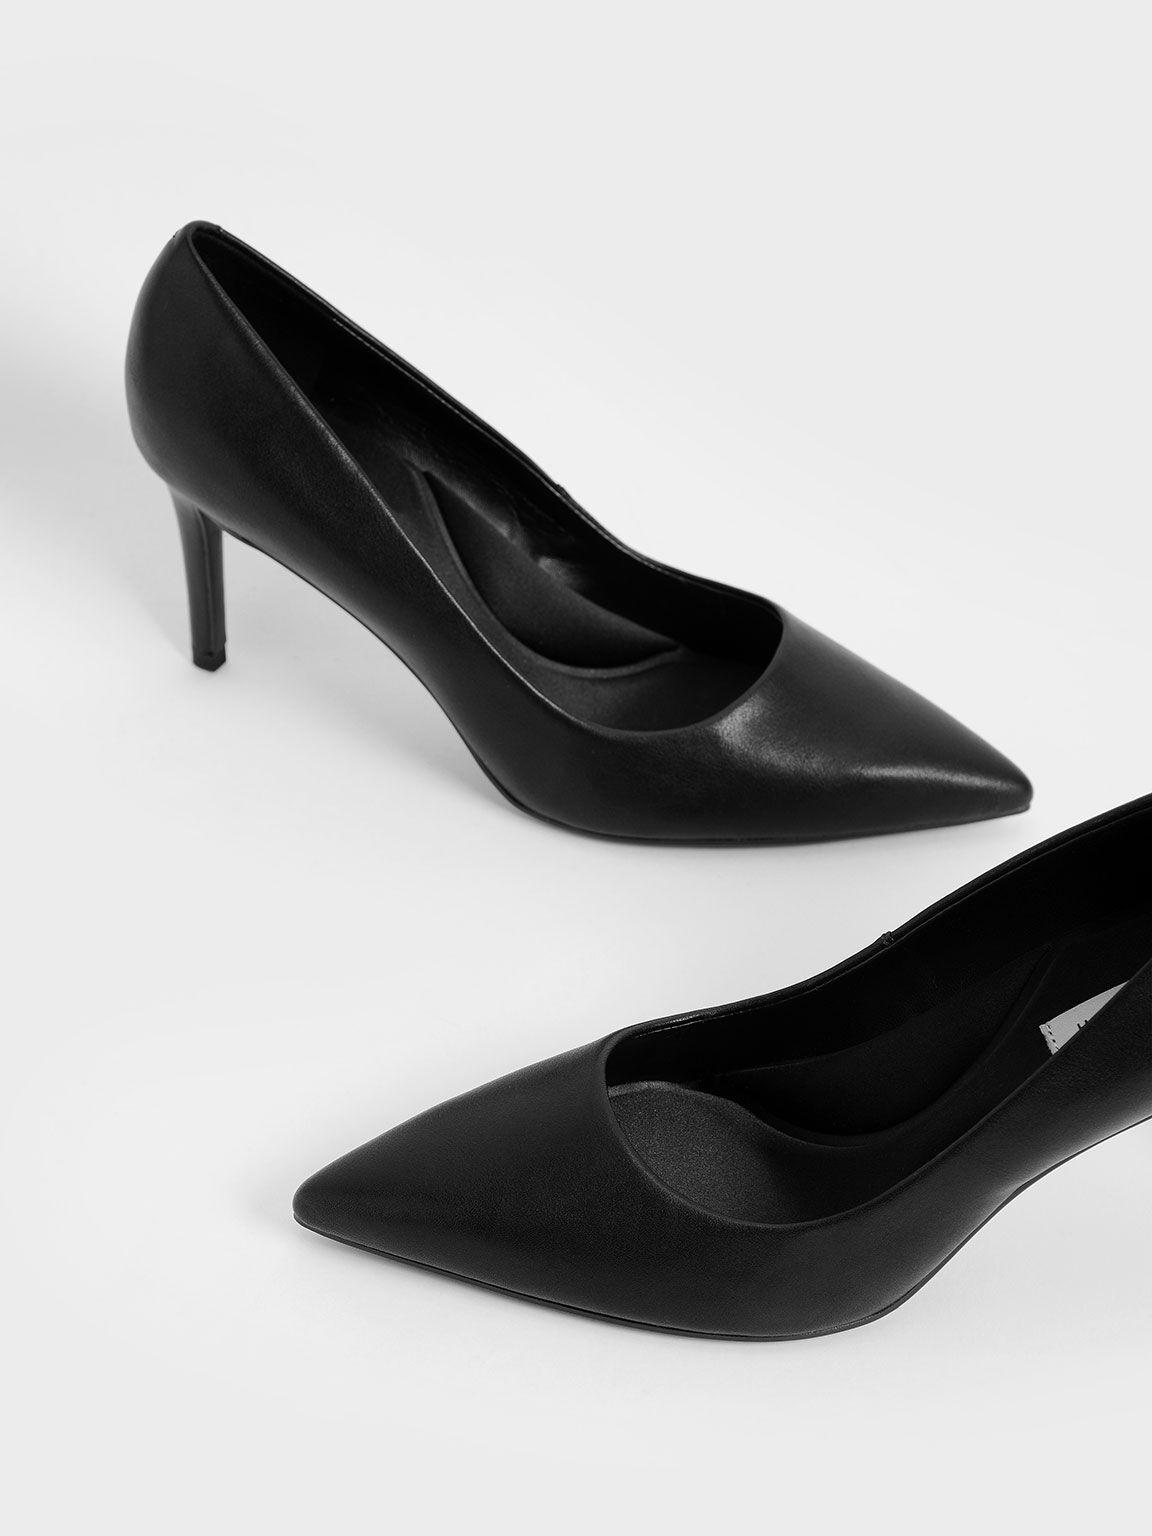 Black Patent Pointed-Toe Pumps - CHARLES & KEITH IN